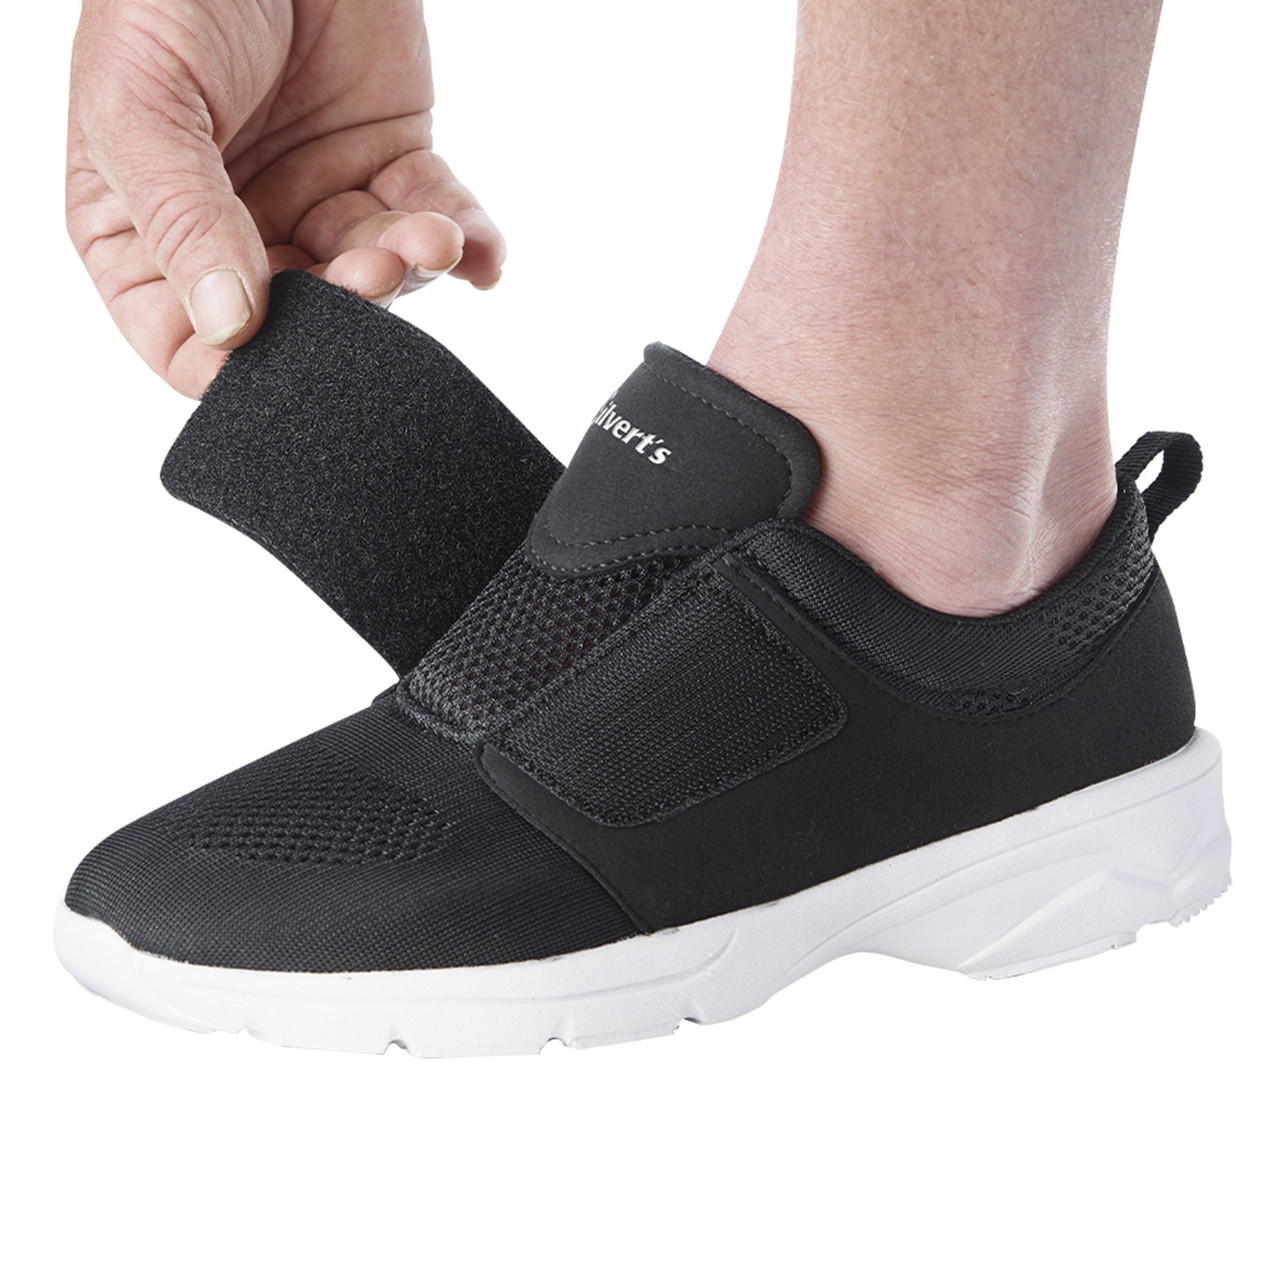 Walking Shoes for - Wide, Slip-Resistant Sneakers - Medical